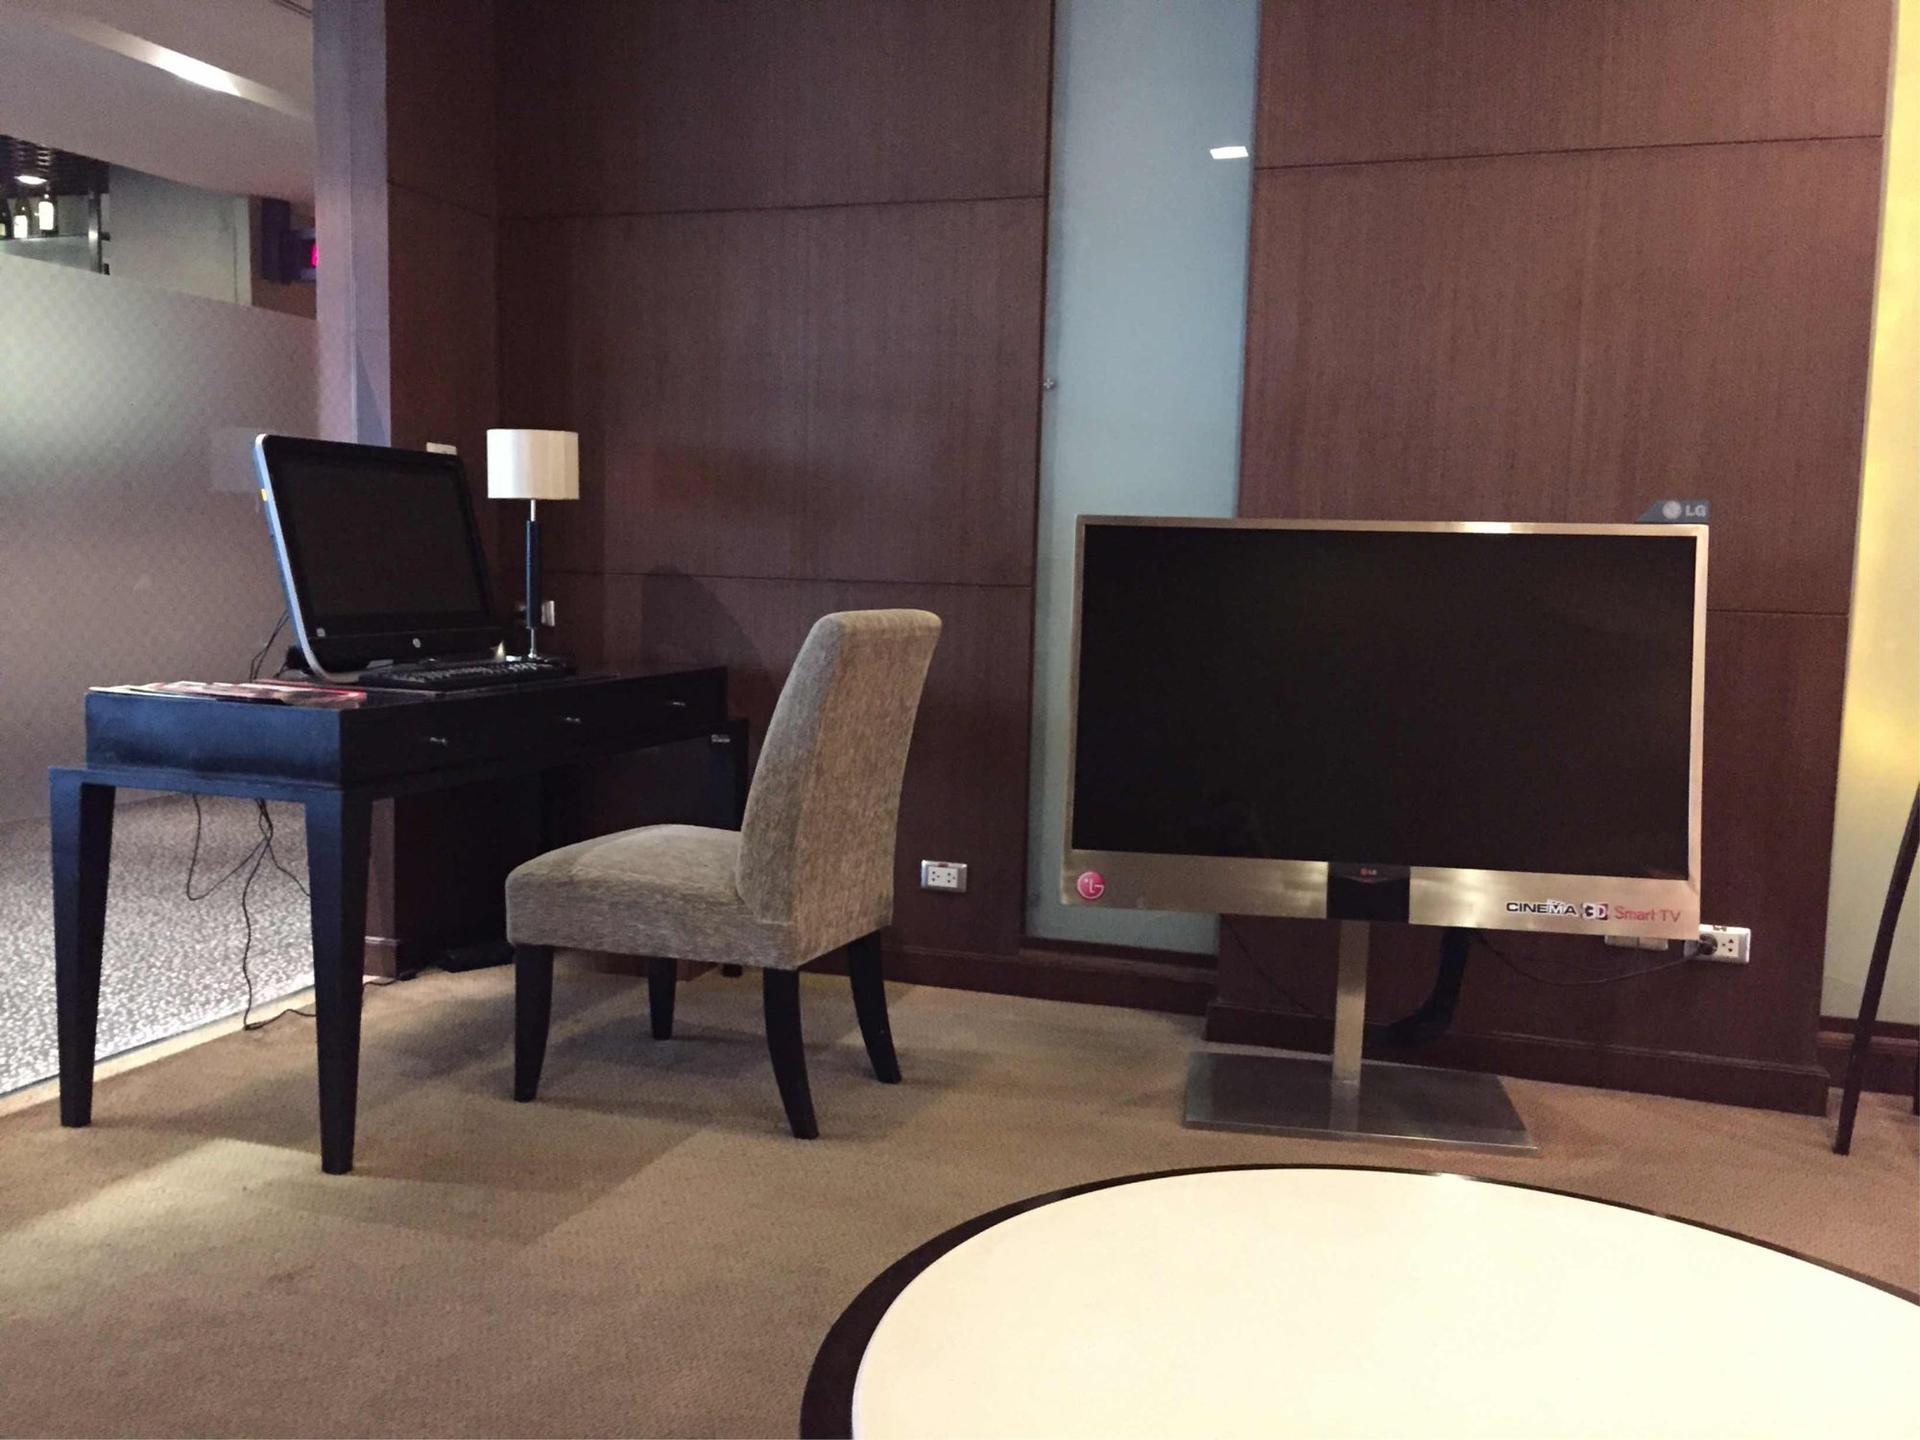 Thai Airways Royal First Class Lounge image 21 of 44